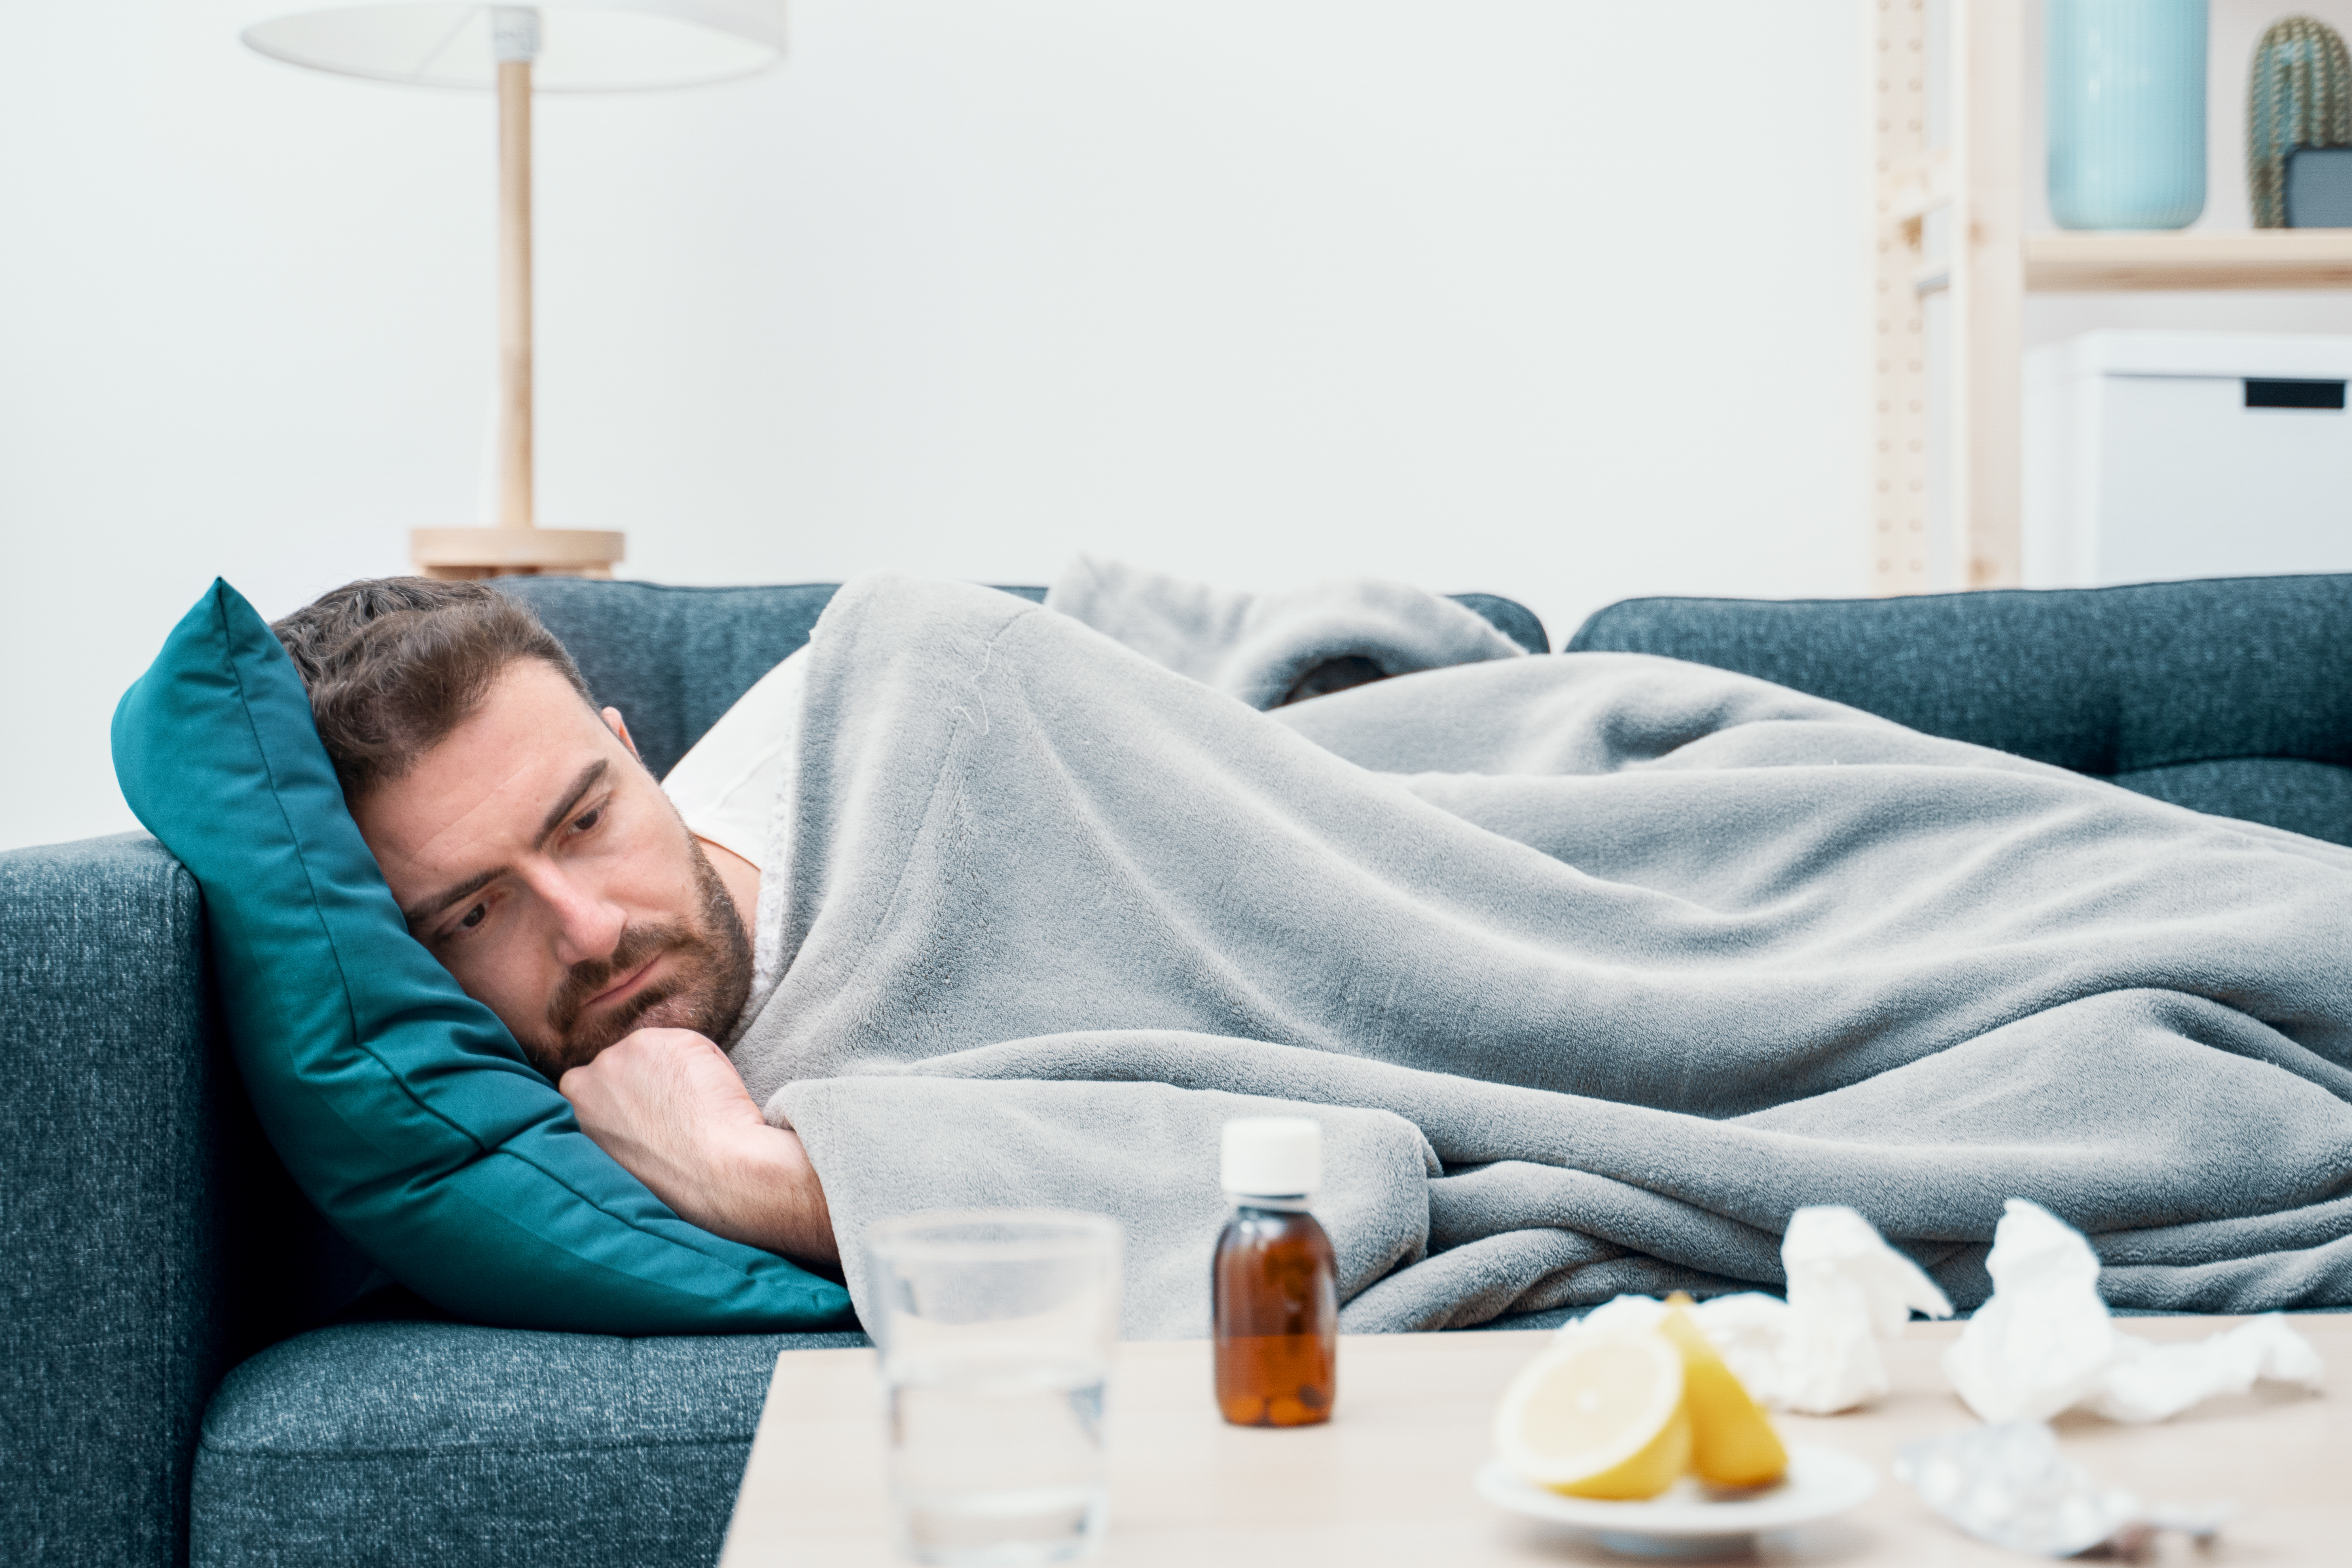 A sick man rests on a couch | Source: Shutterstock